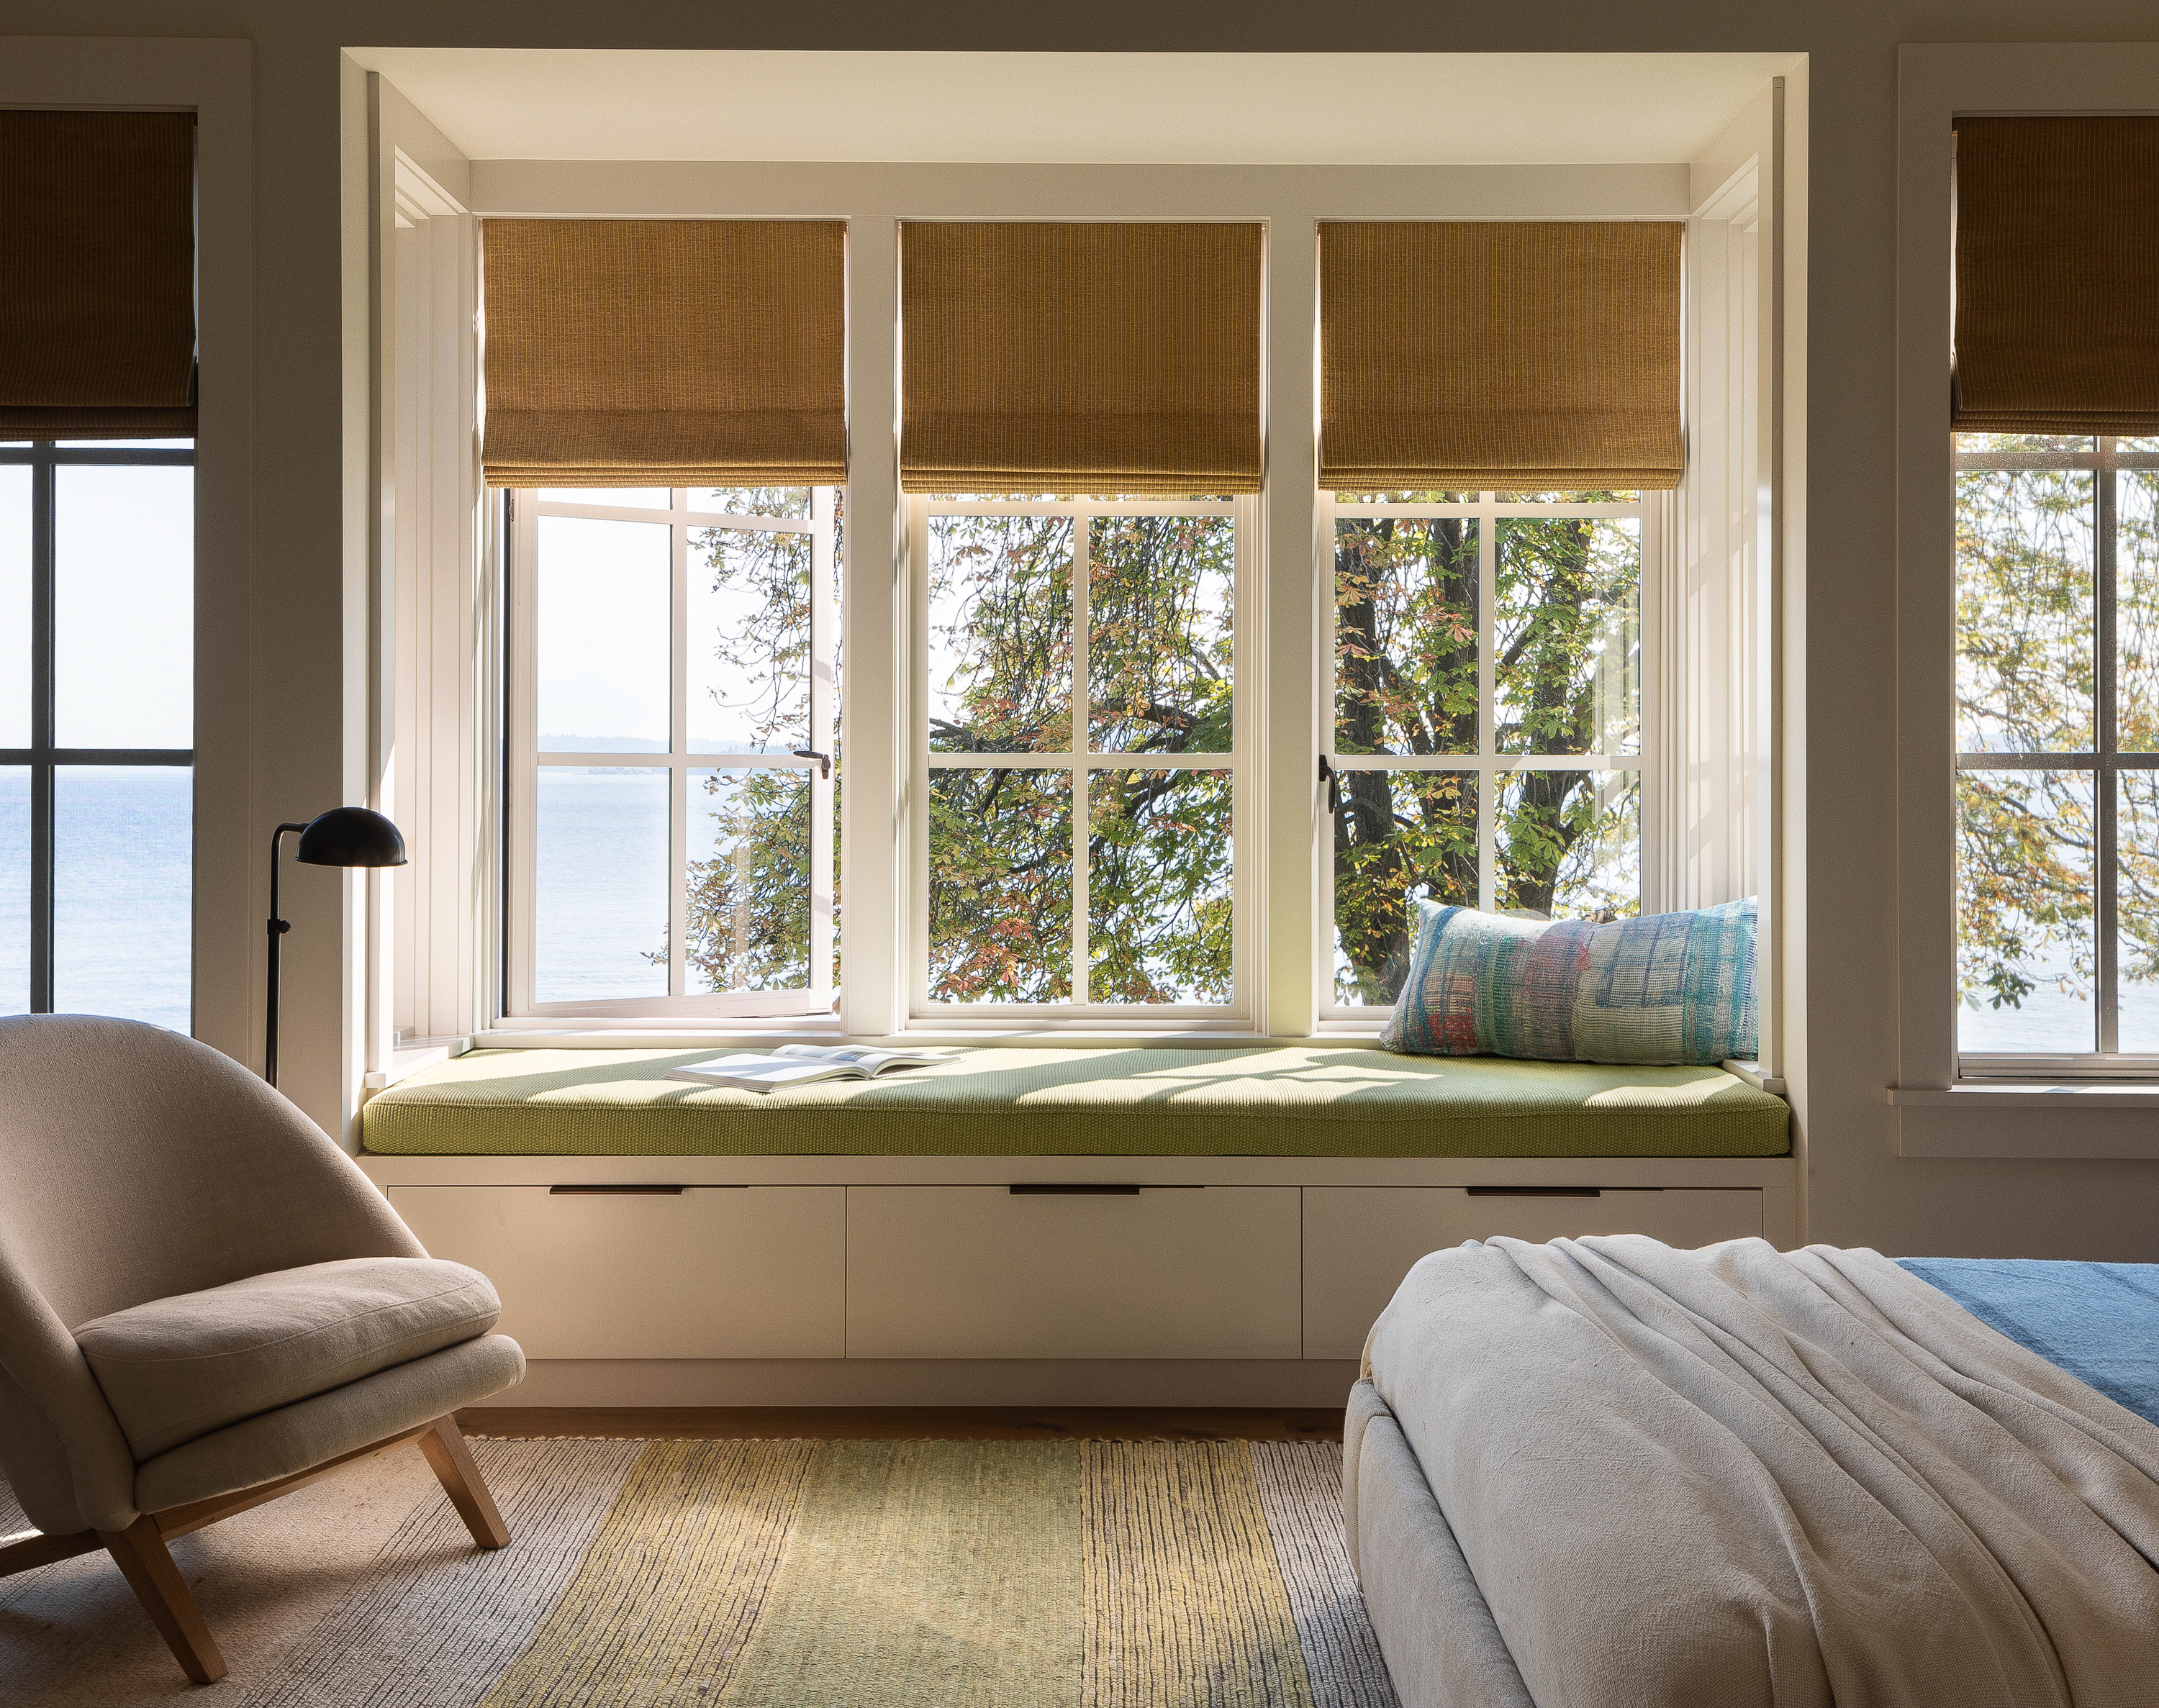 The guest room, located upstairs, is bright and airy with pops of green and blue accents. It features a window seat offering awesome views, adding to its inviting charm.